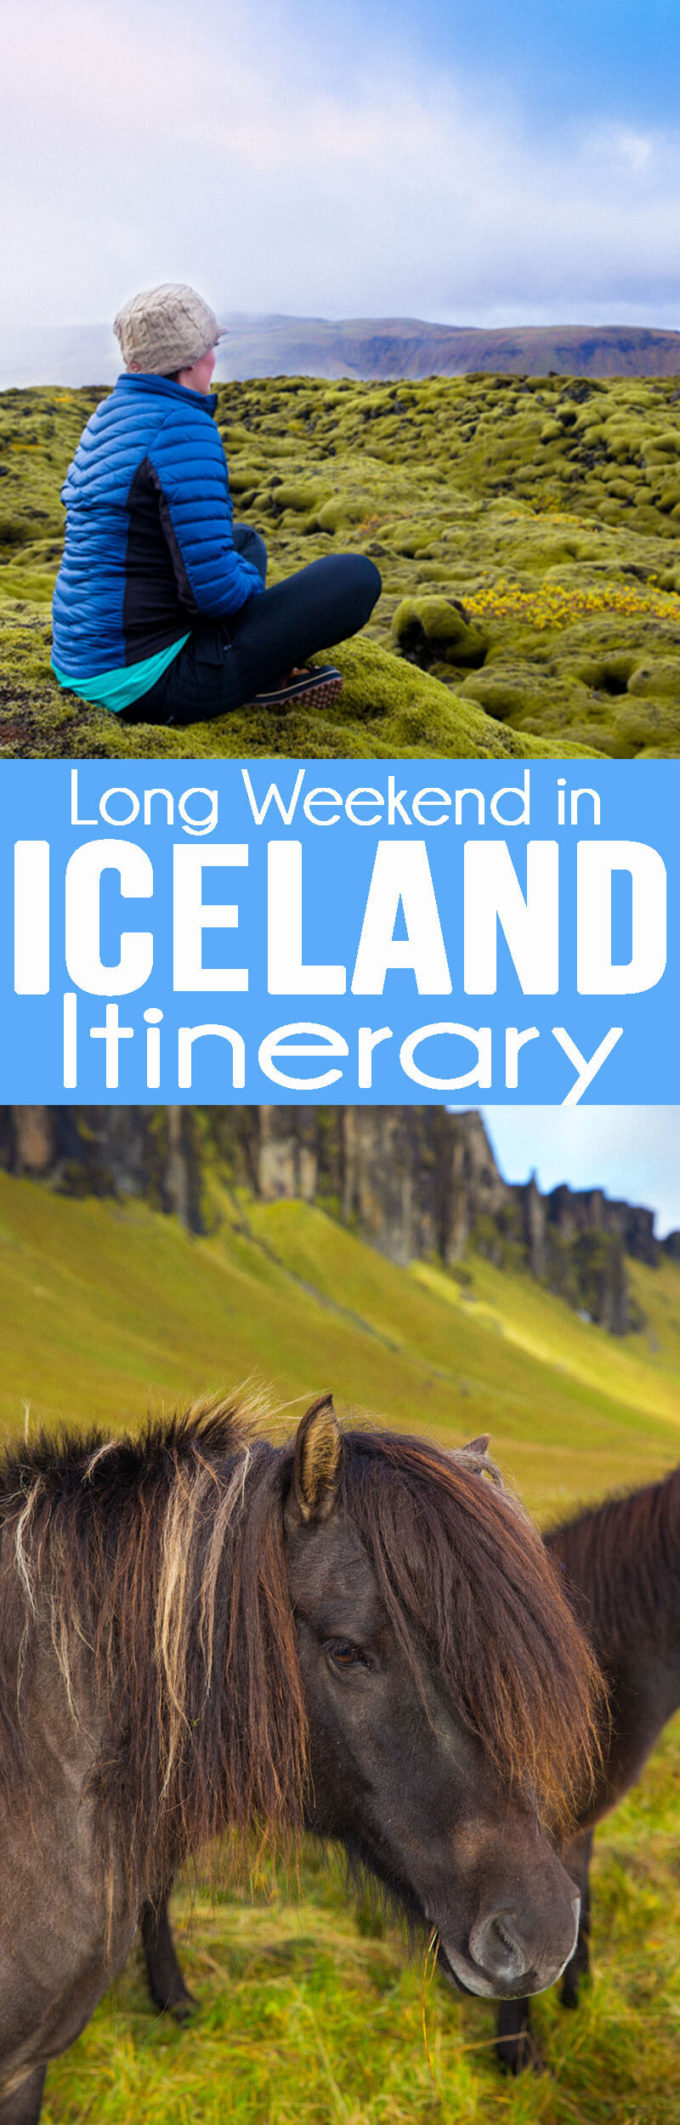 Long weekend in Iceland itinerary, 3 days golden circle and more